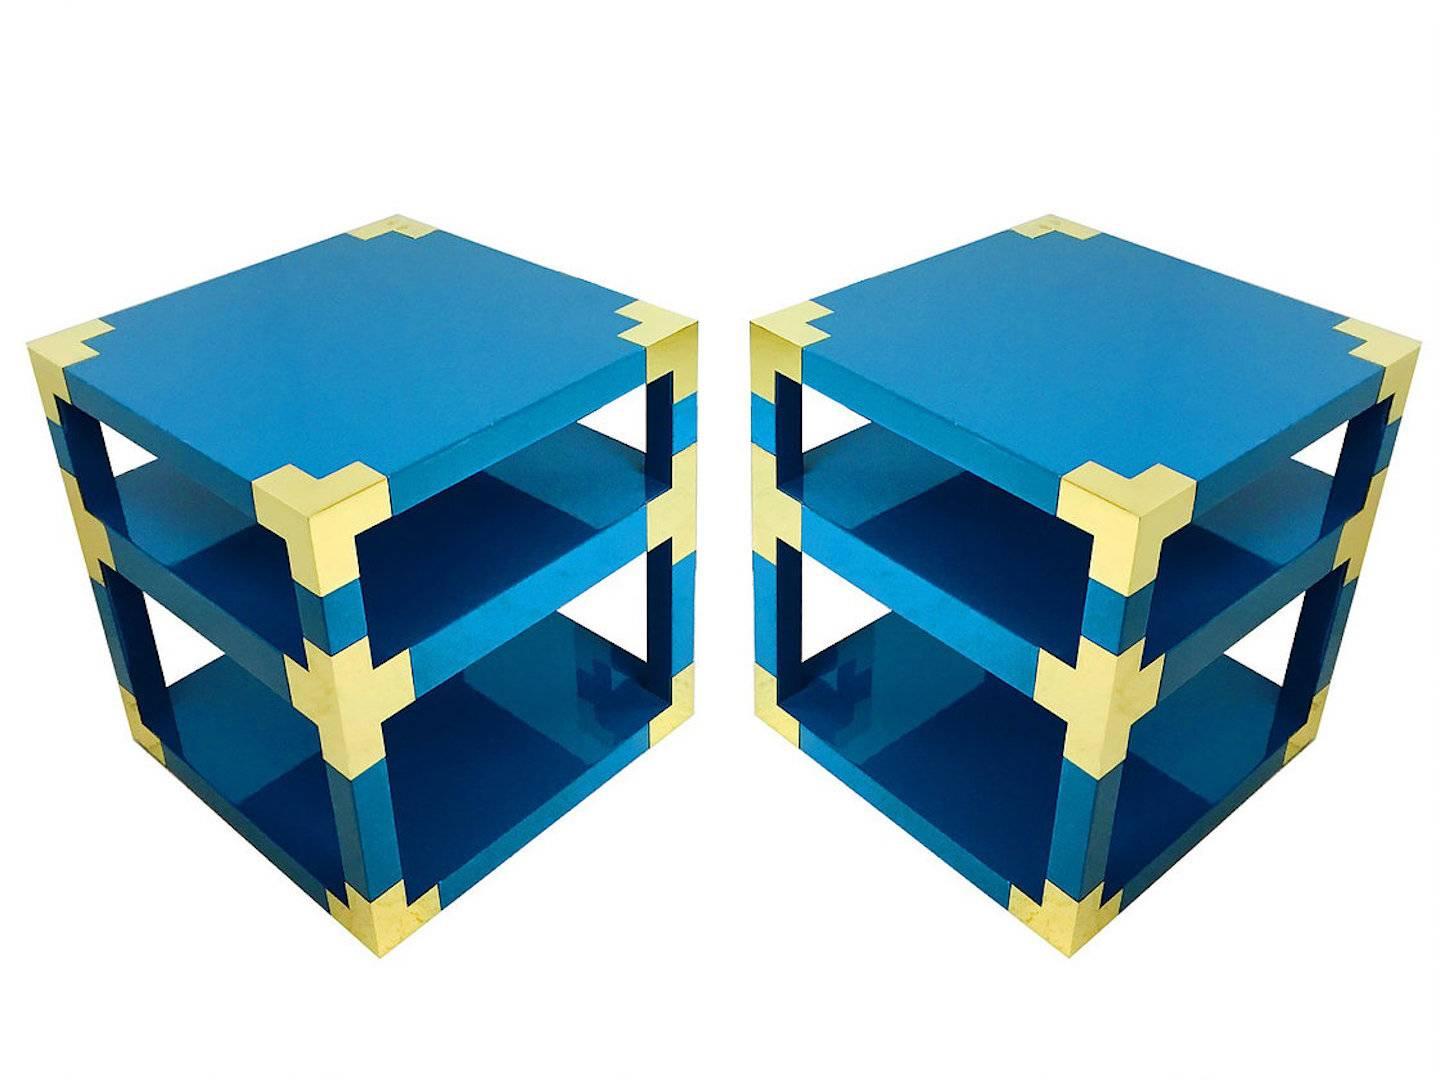 Custom brass and lacquer cube side tables can be made with your color preference, size, and metal finish. Contact us for more information.
Sold as individual side table

The lead time is 6-8 weeks. 

As shown
dimensions: 24